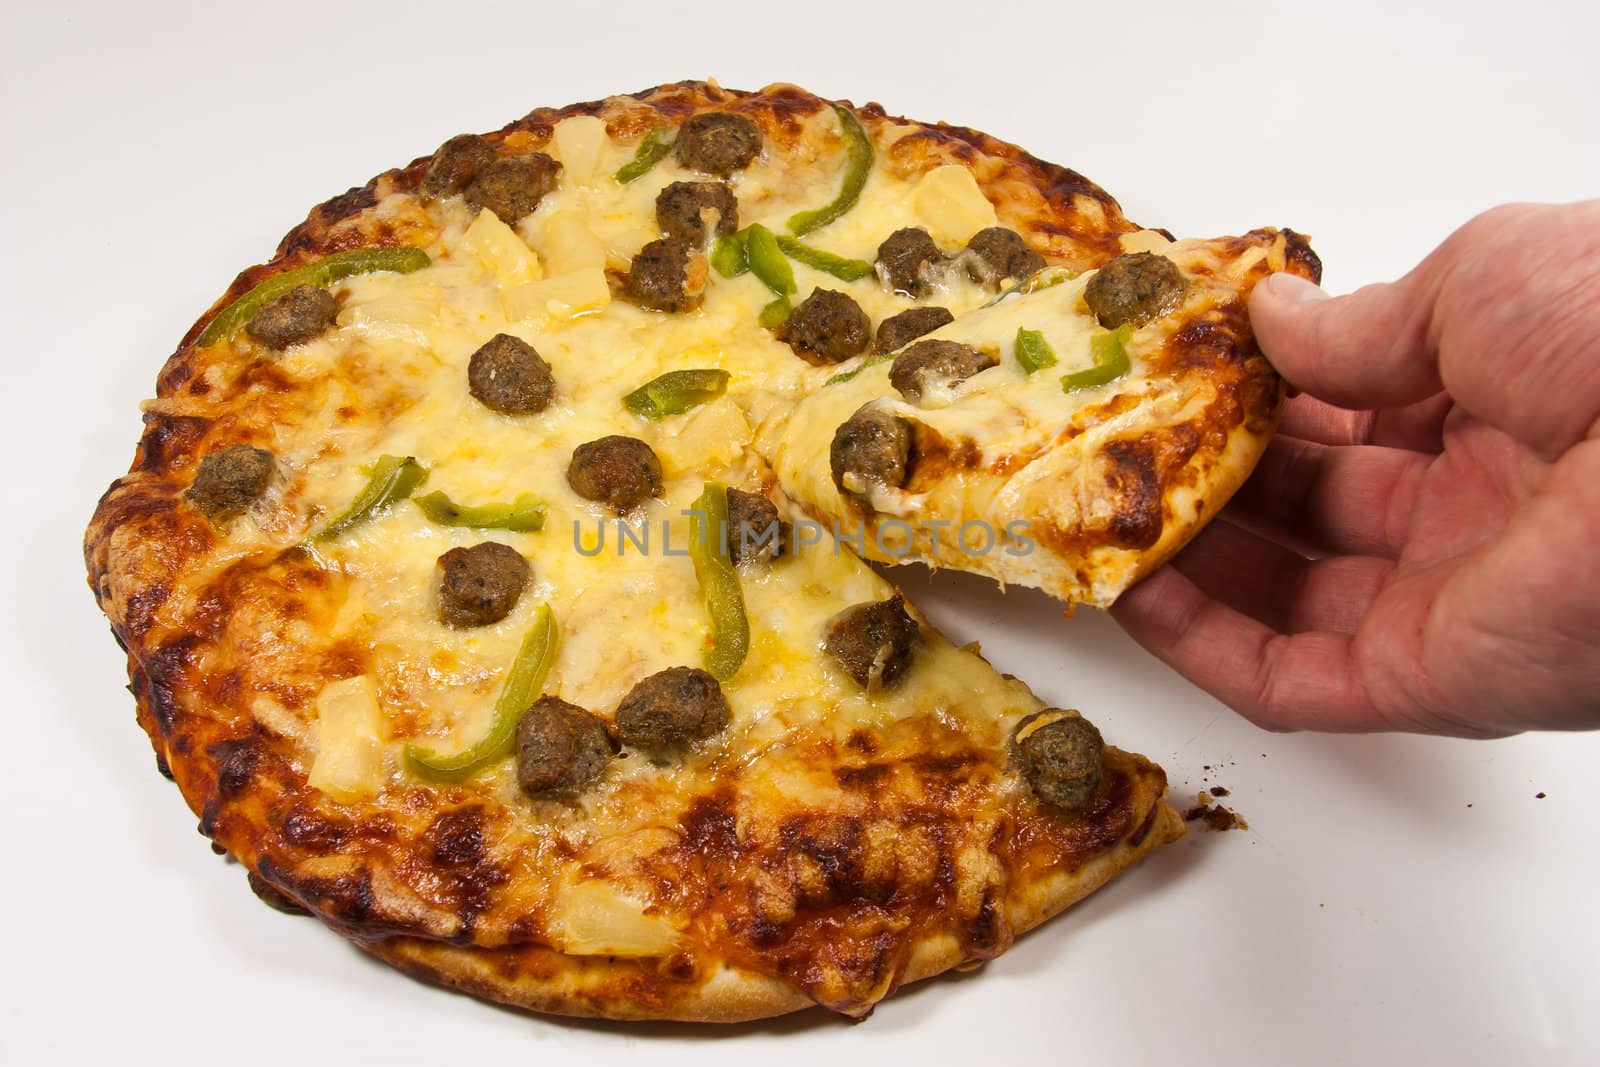 Picture of a hand grabbing a pizza slice